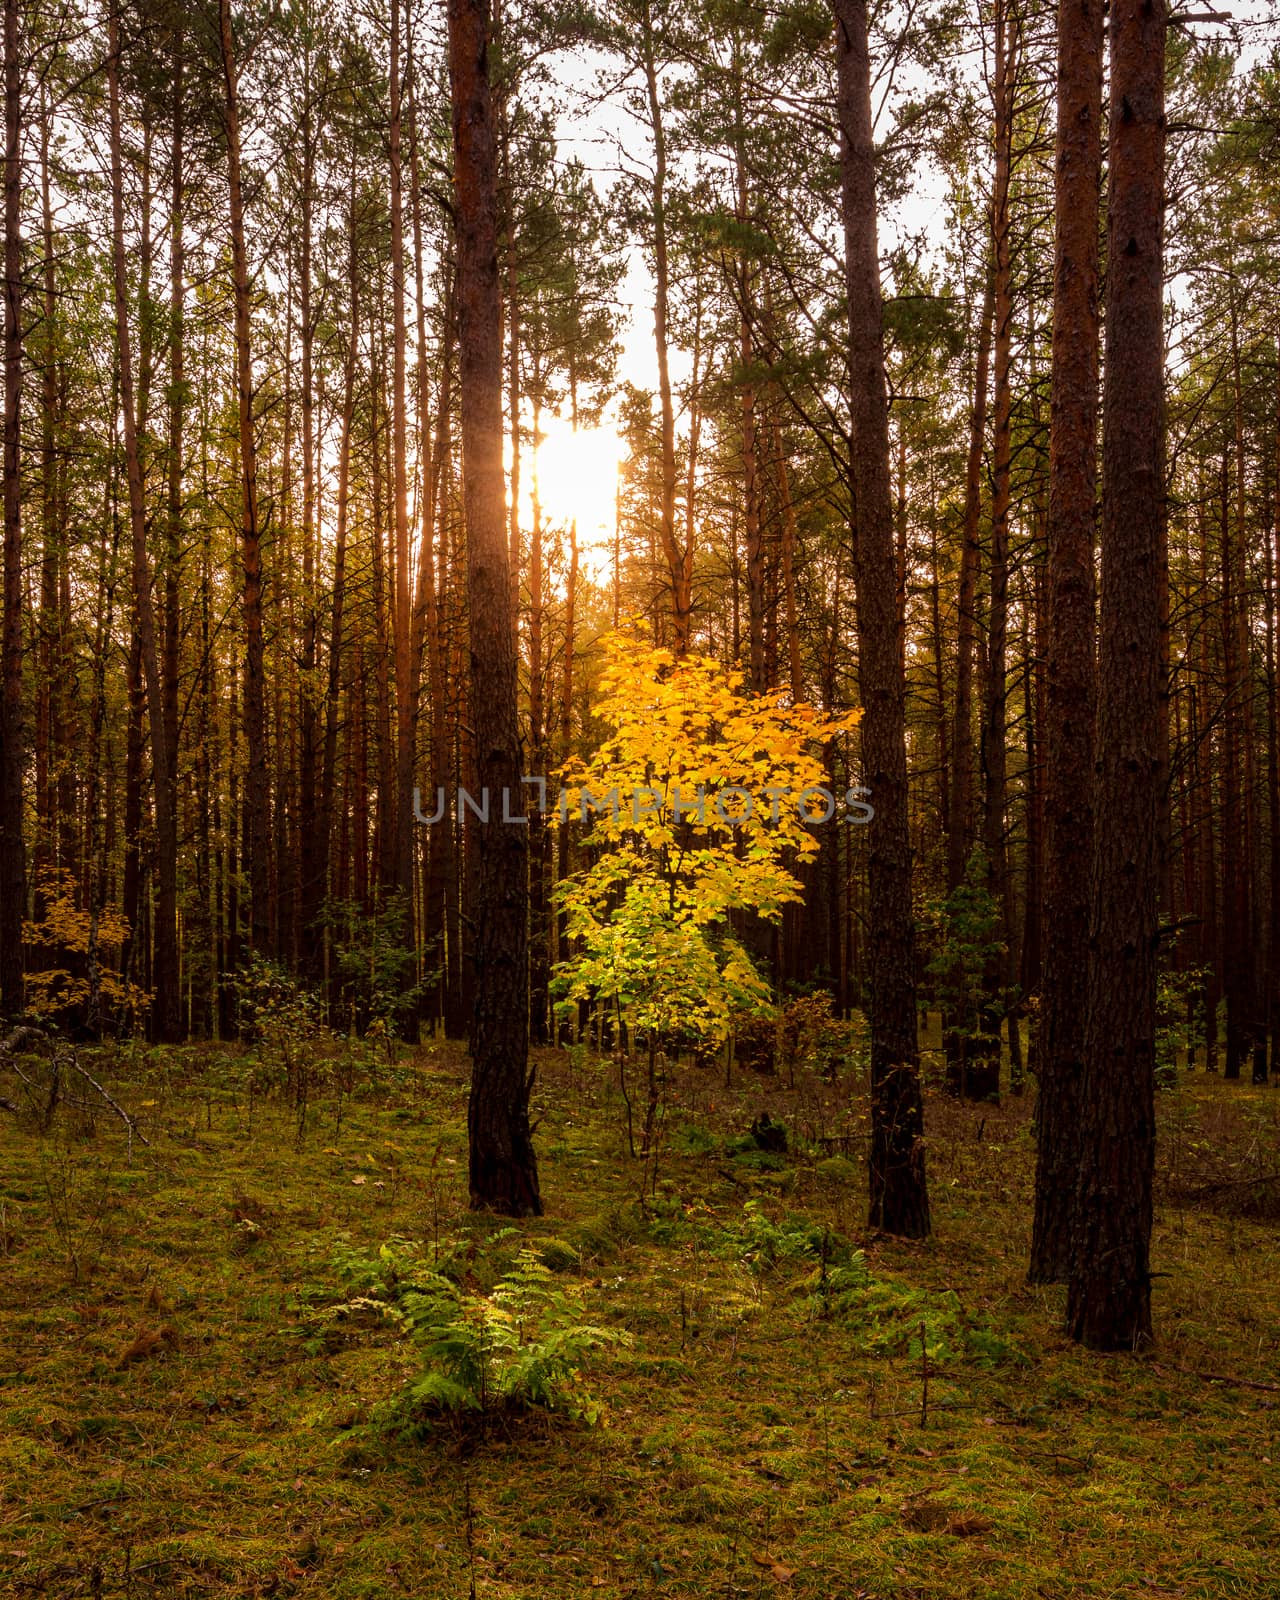 Maple with golden leaves in the autumn pine forest at sunset or sunrise. Sunbeams shining between tree trunks.